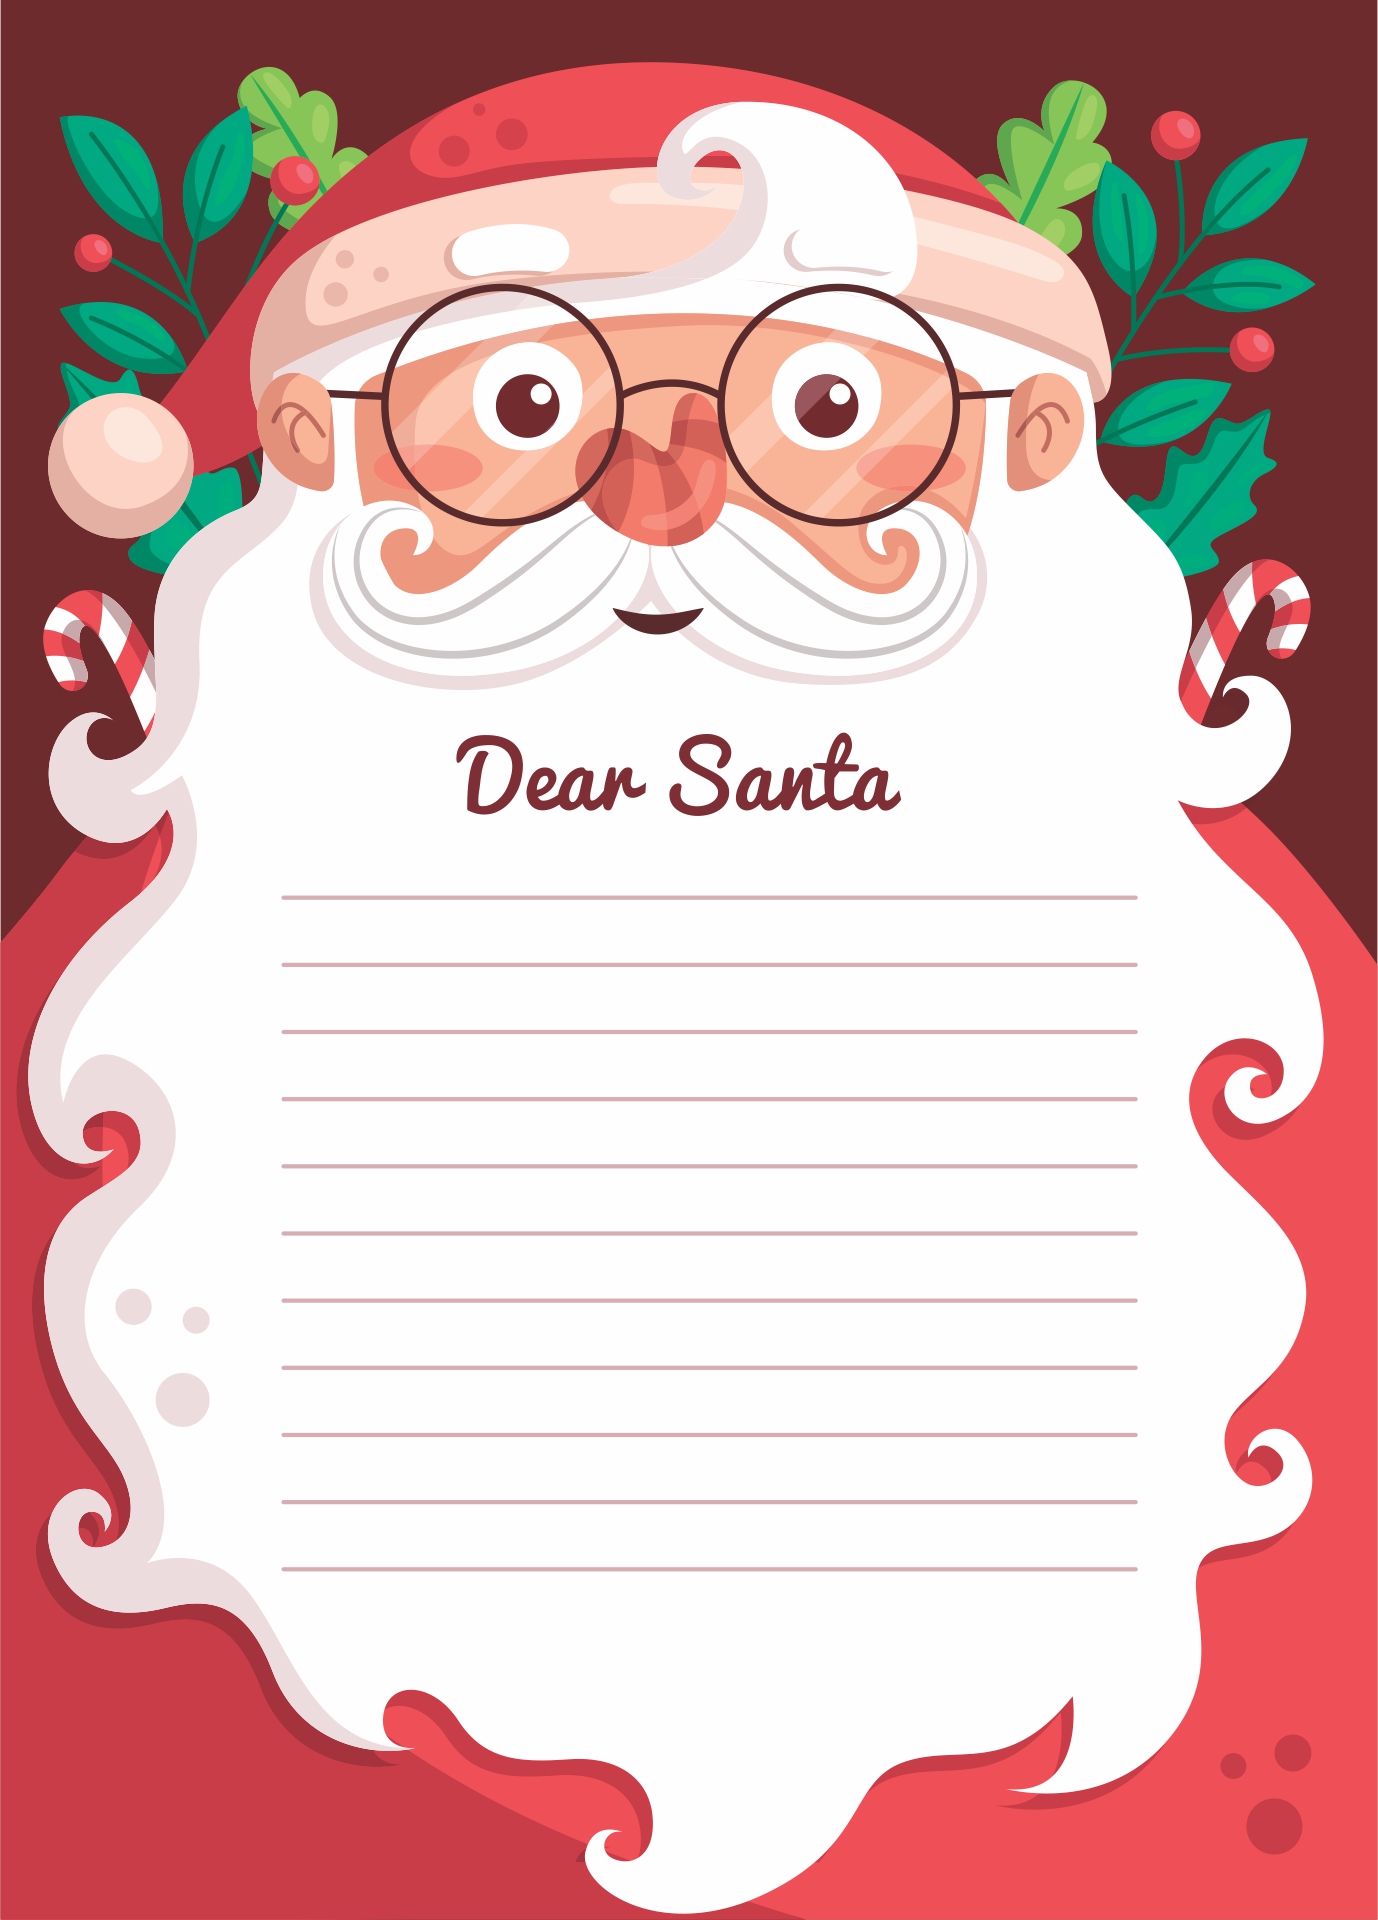 santa-claus-letter-printable-simply-edit-print-and-put-it-in-an